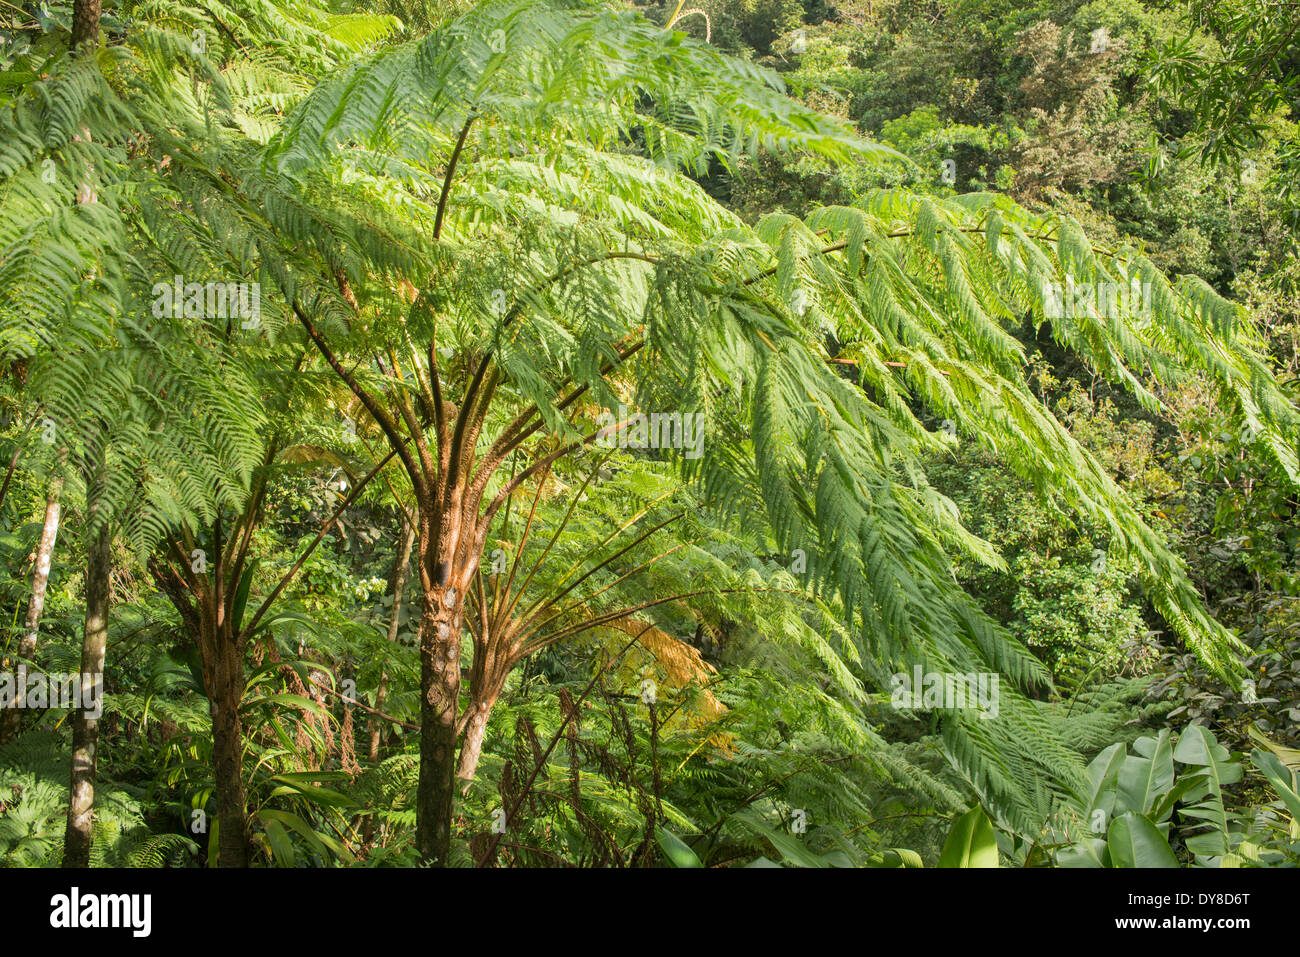 Tree Fern from the genus Cyathea, Martinique, French West Indies Stock Photo